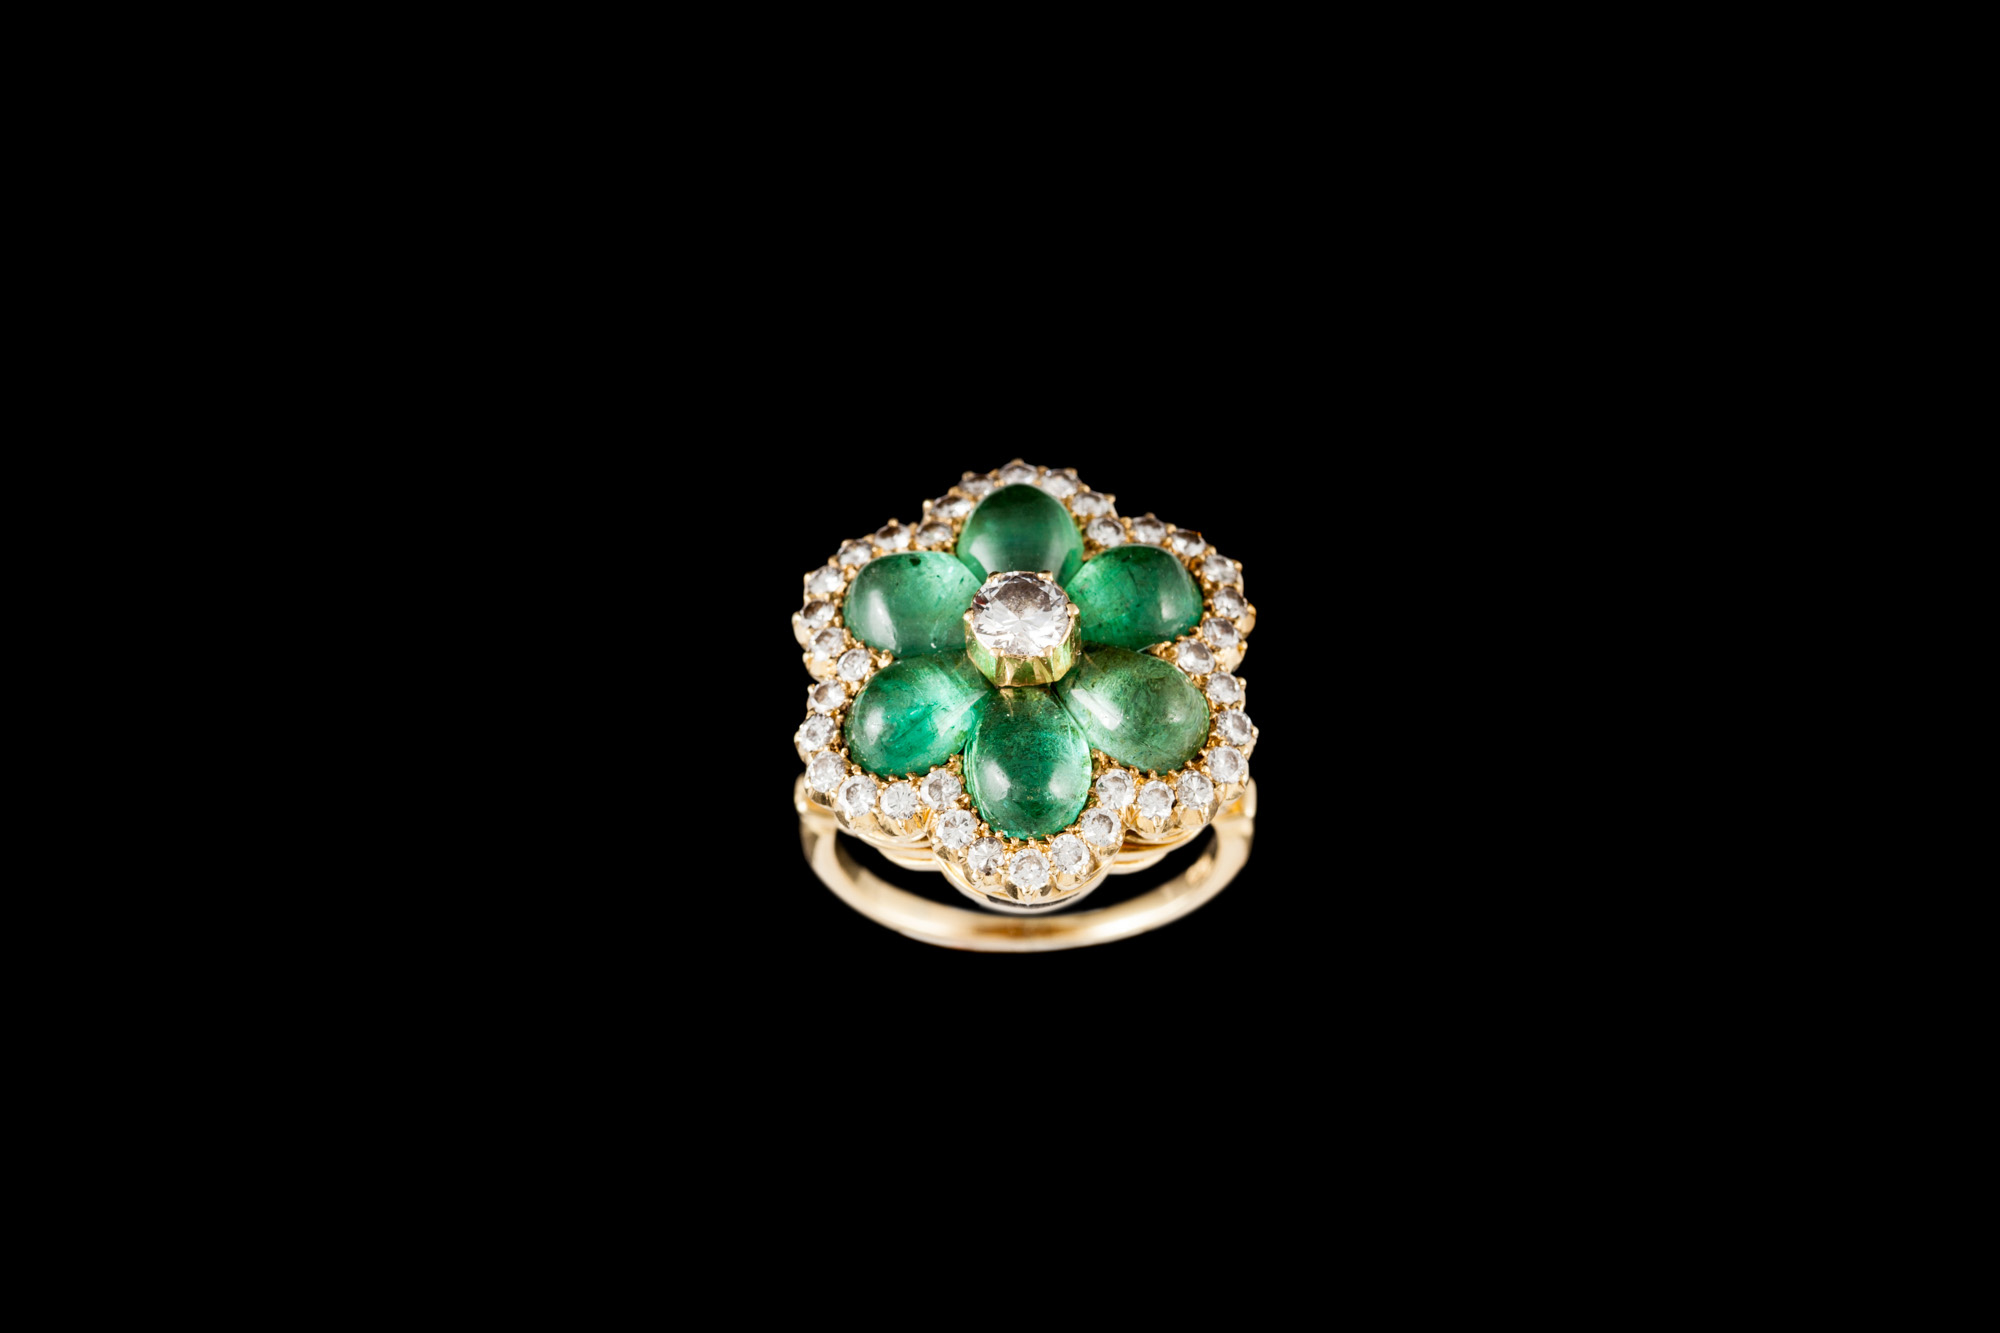 A DIAMOND AND EMERALD CLUSTER FLOWER RING/PENDANT, with centre diamond of approx. 0.